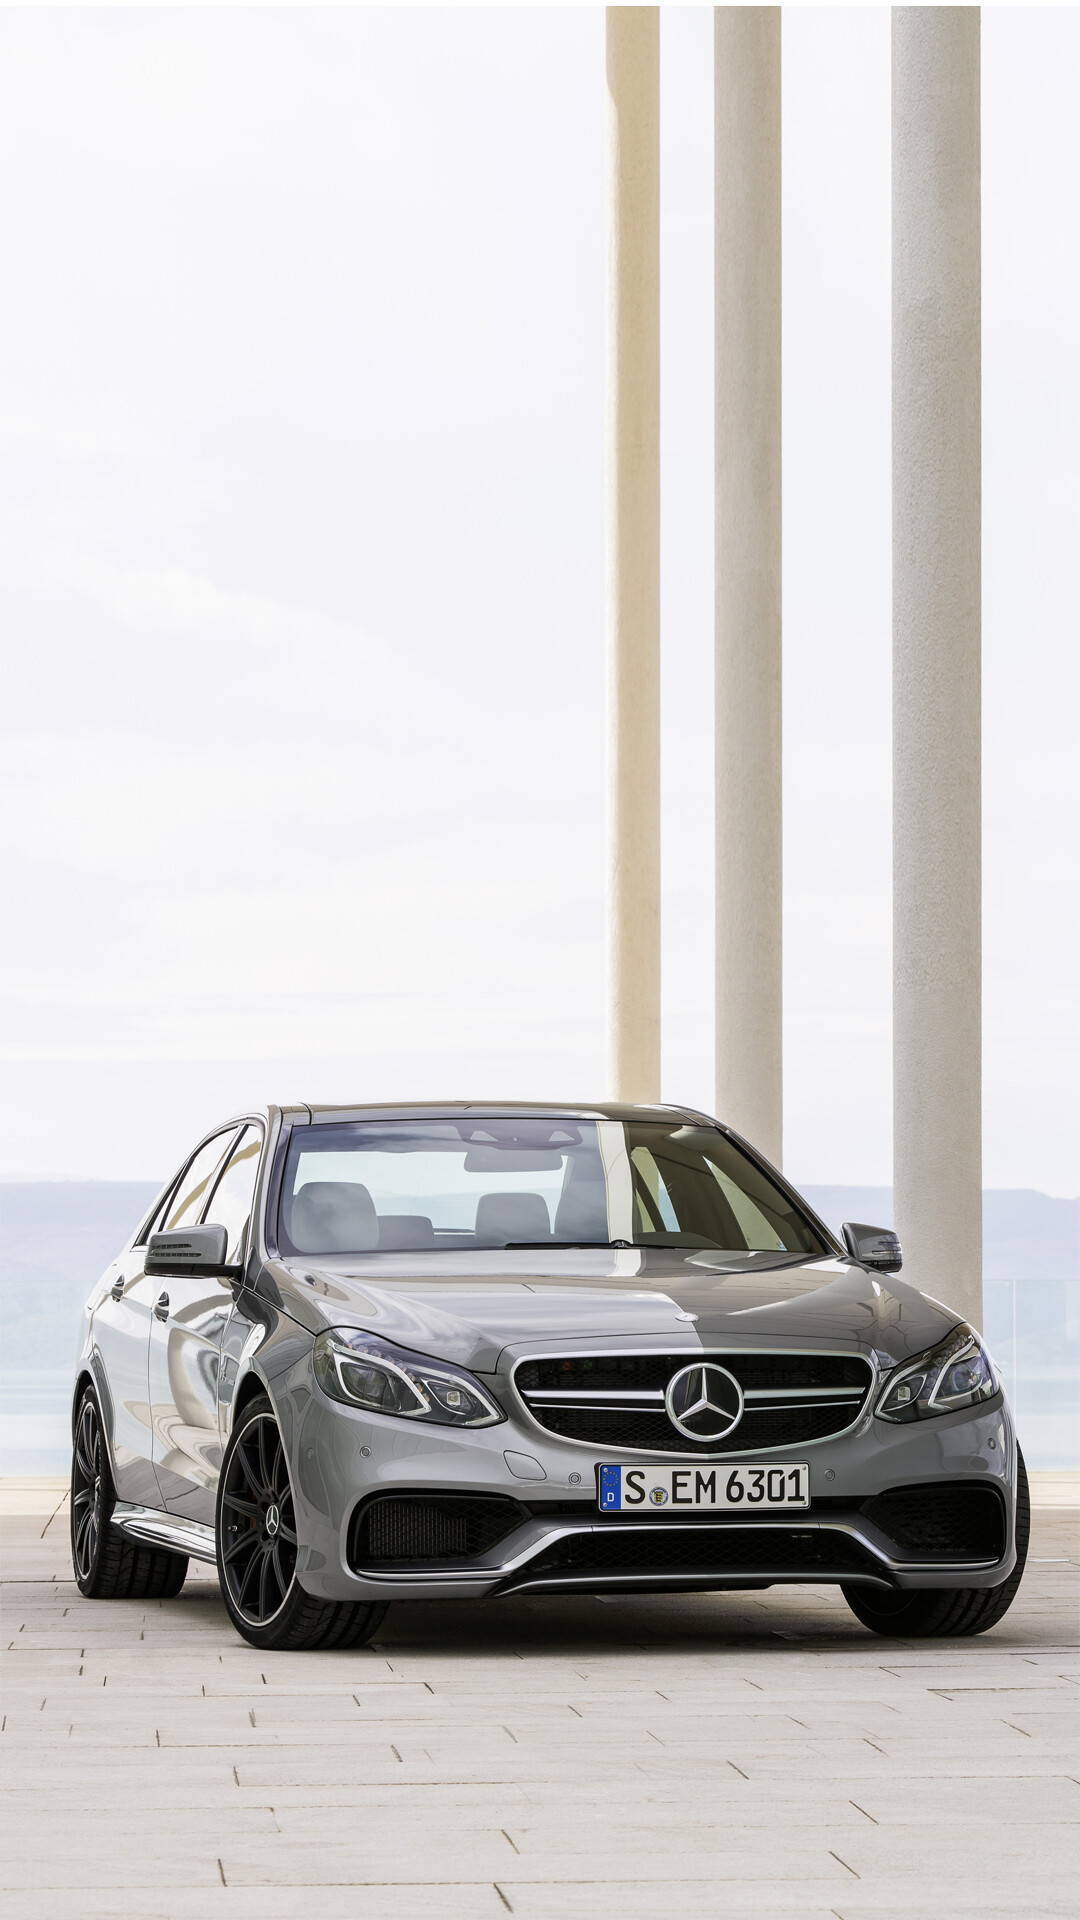 Mercedes-Benz: E63 AMG, The company has fuel cell plant in Burnaby, British Columbia. 1080x1920 Full HD Wallpaper.